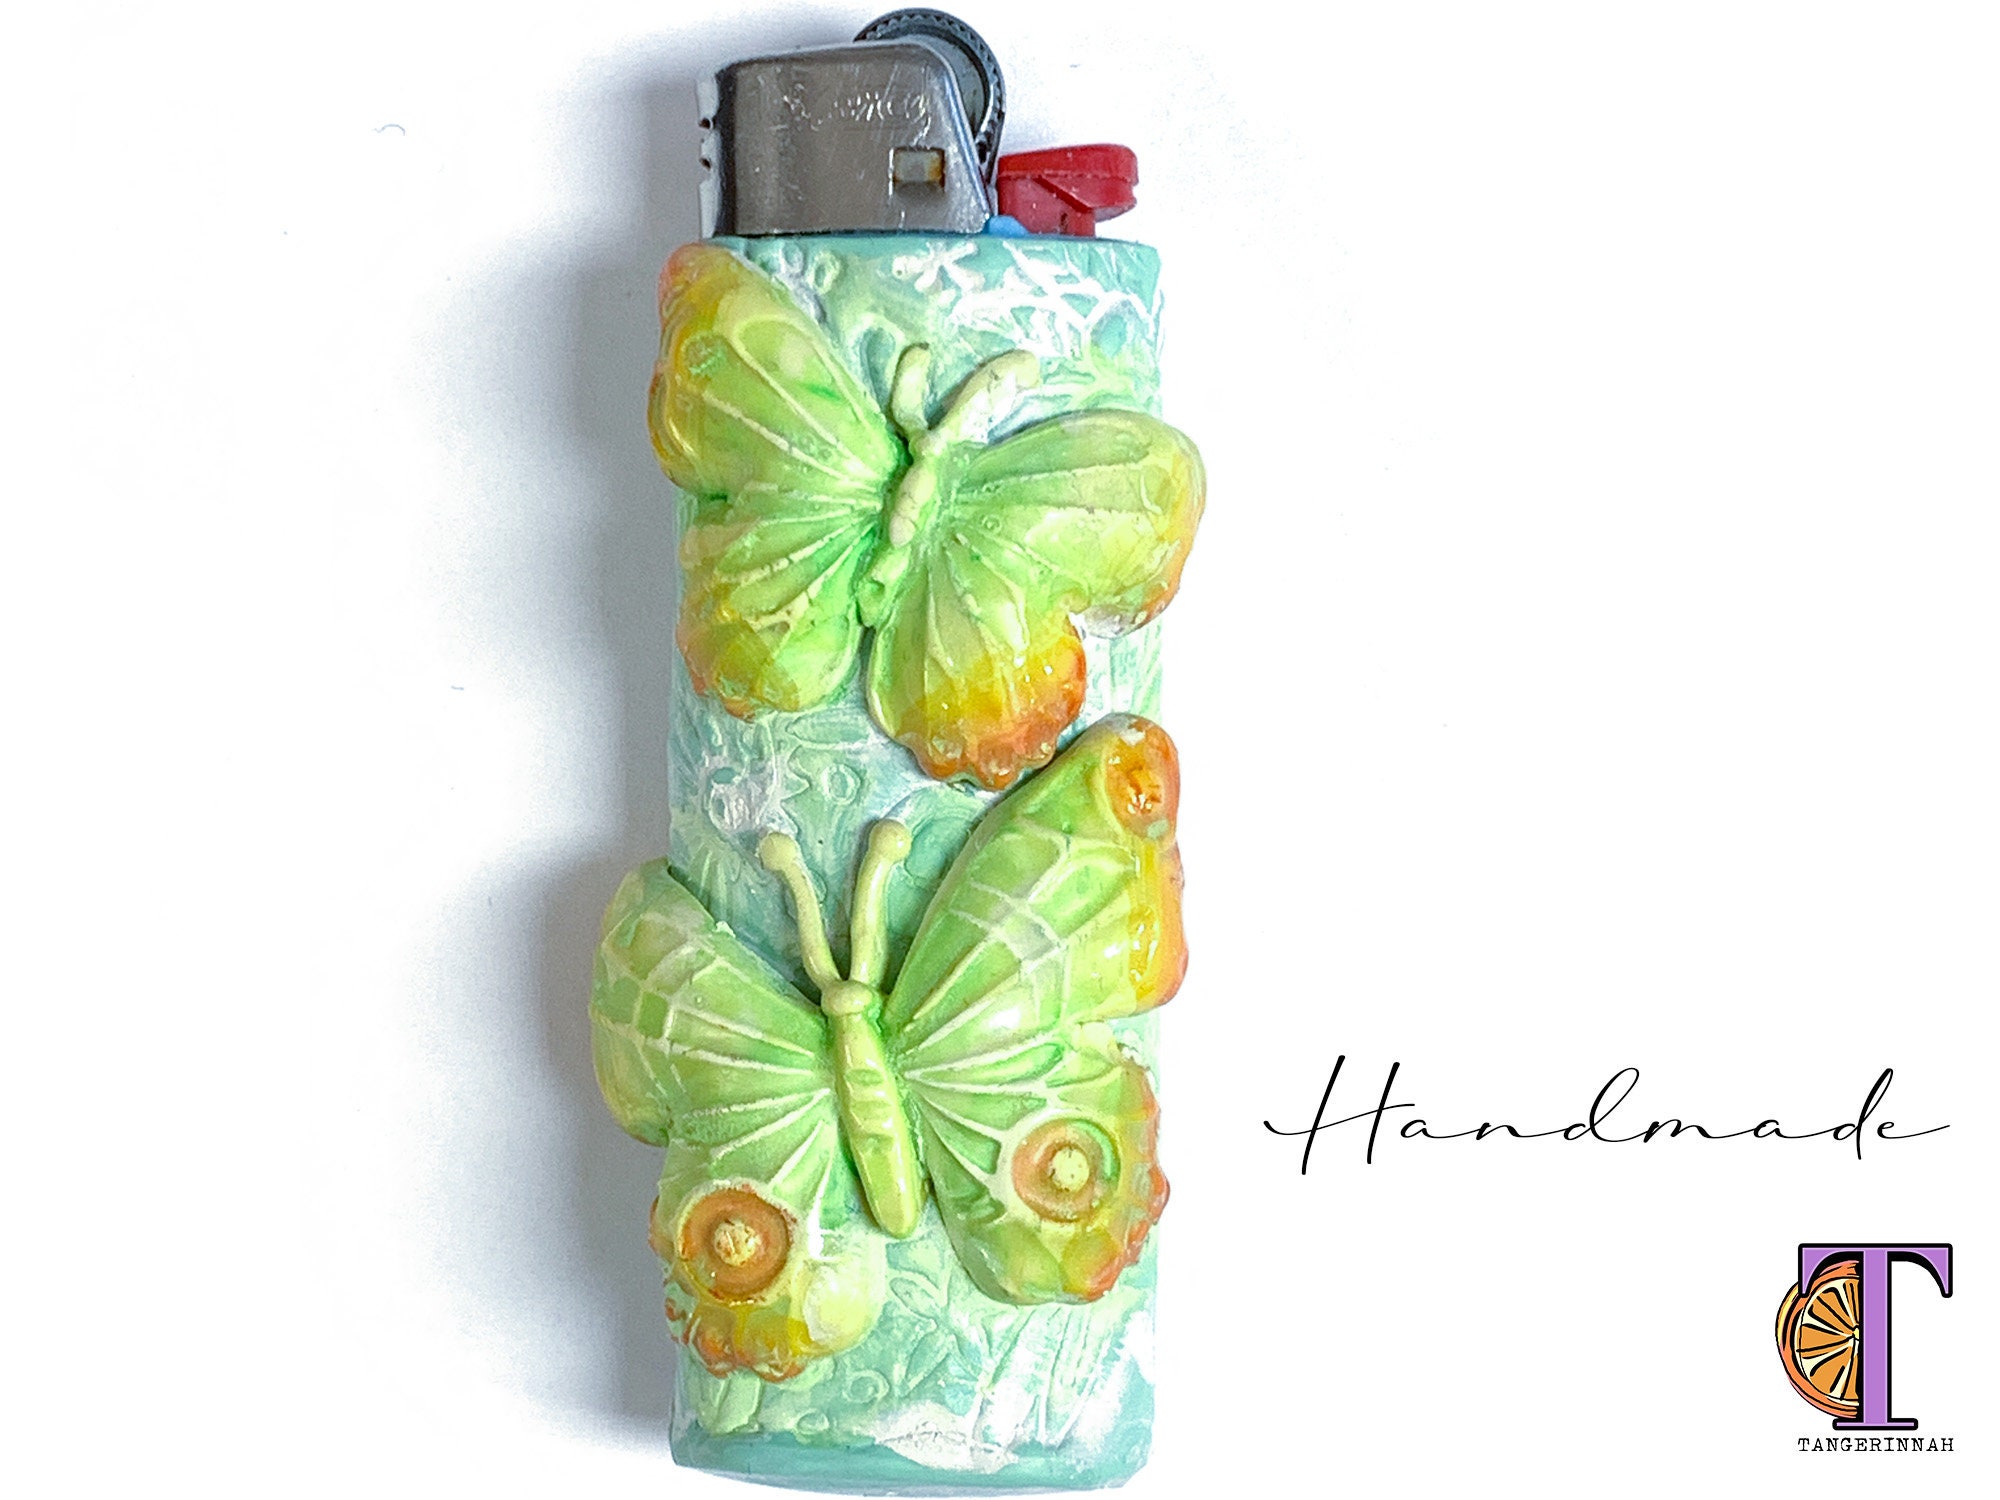 Butterfly Vintage Bic Lighter Covers -  Canada